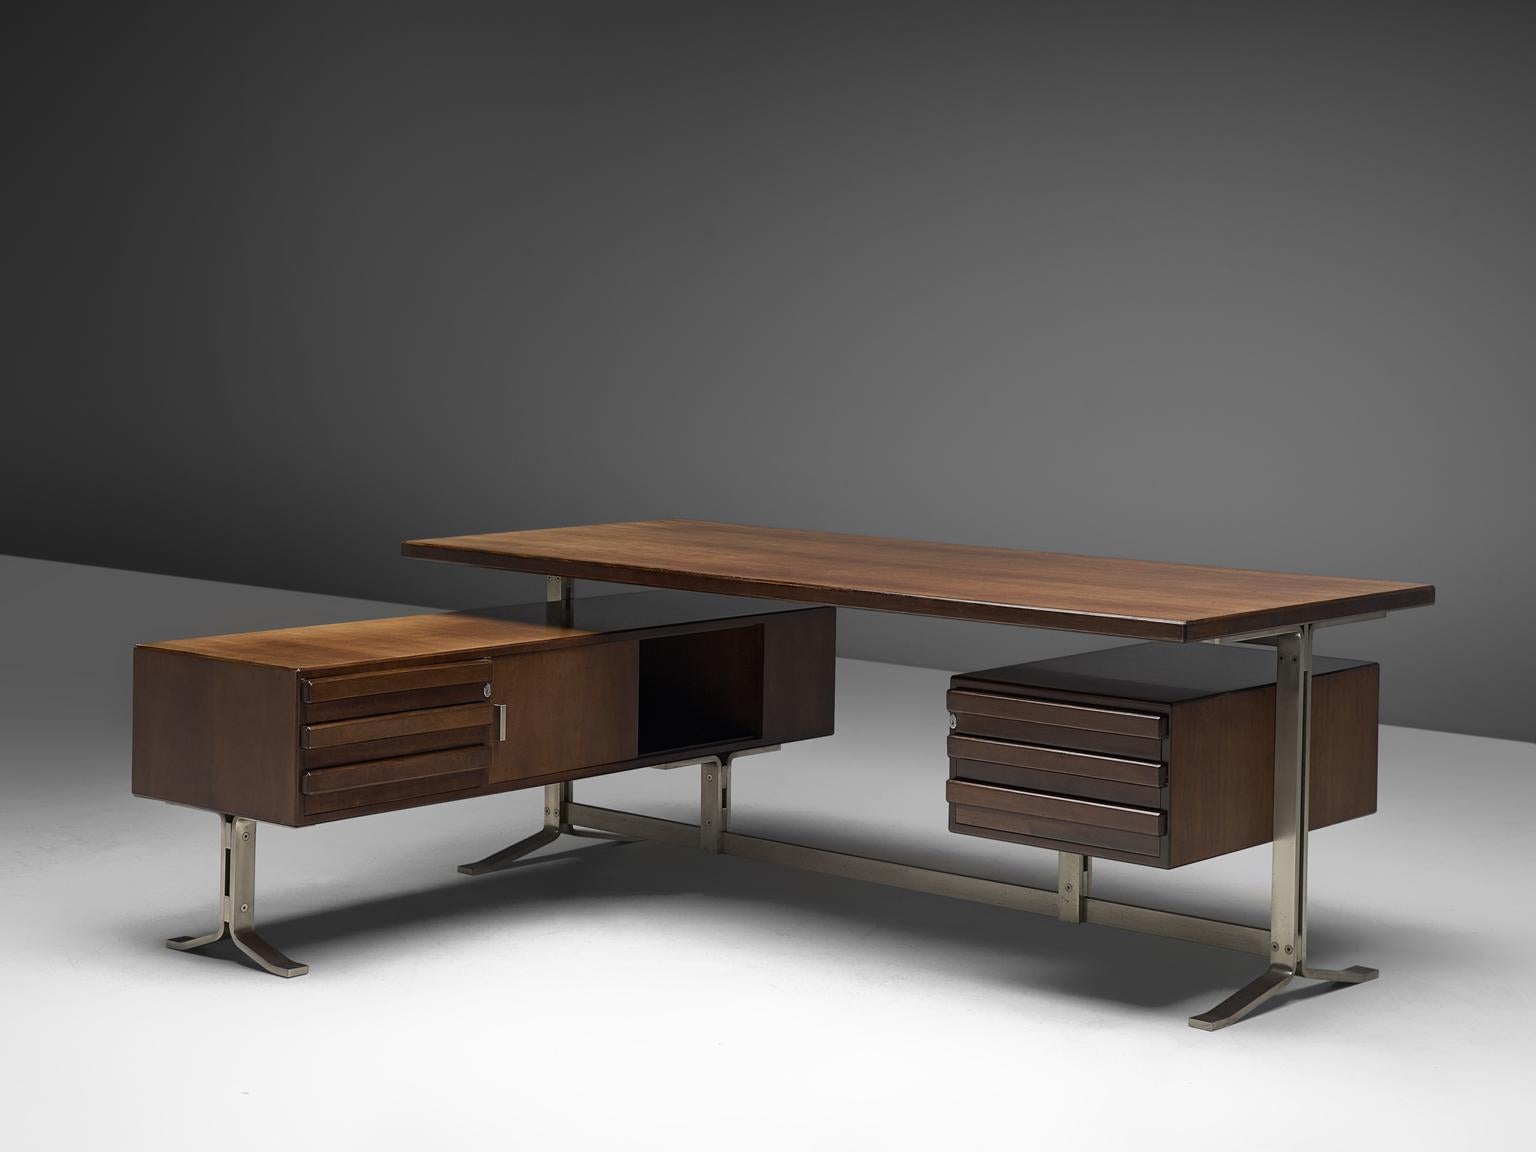 Desk with retour, in walnut and metal, Italy 1960s.

Large desk and return. The frame is made of metal, which forms a beautiful combination with the walnut compartments and table top. Both sides of the desks are equipped with three drawers. 
This